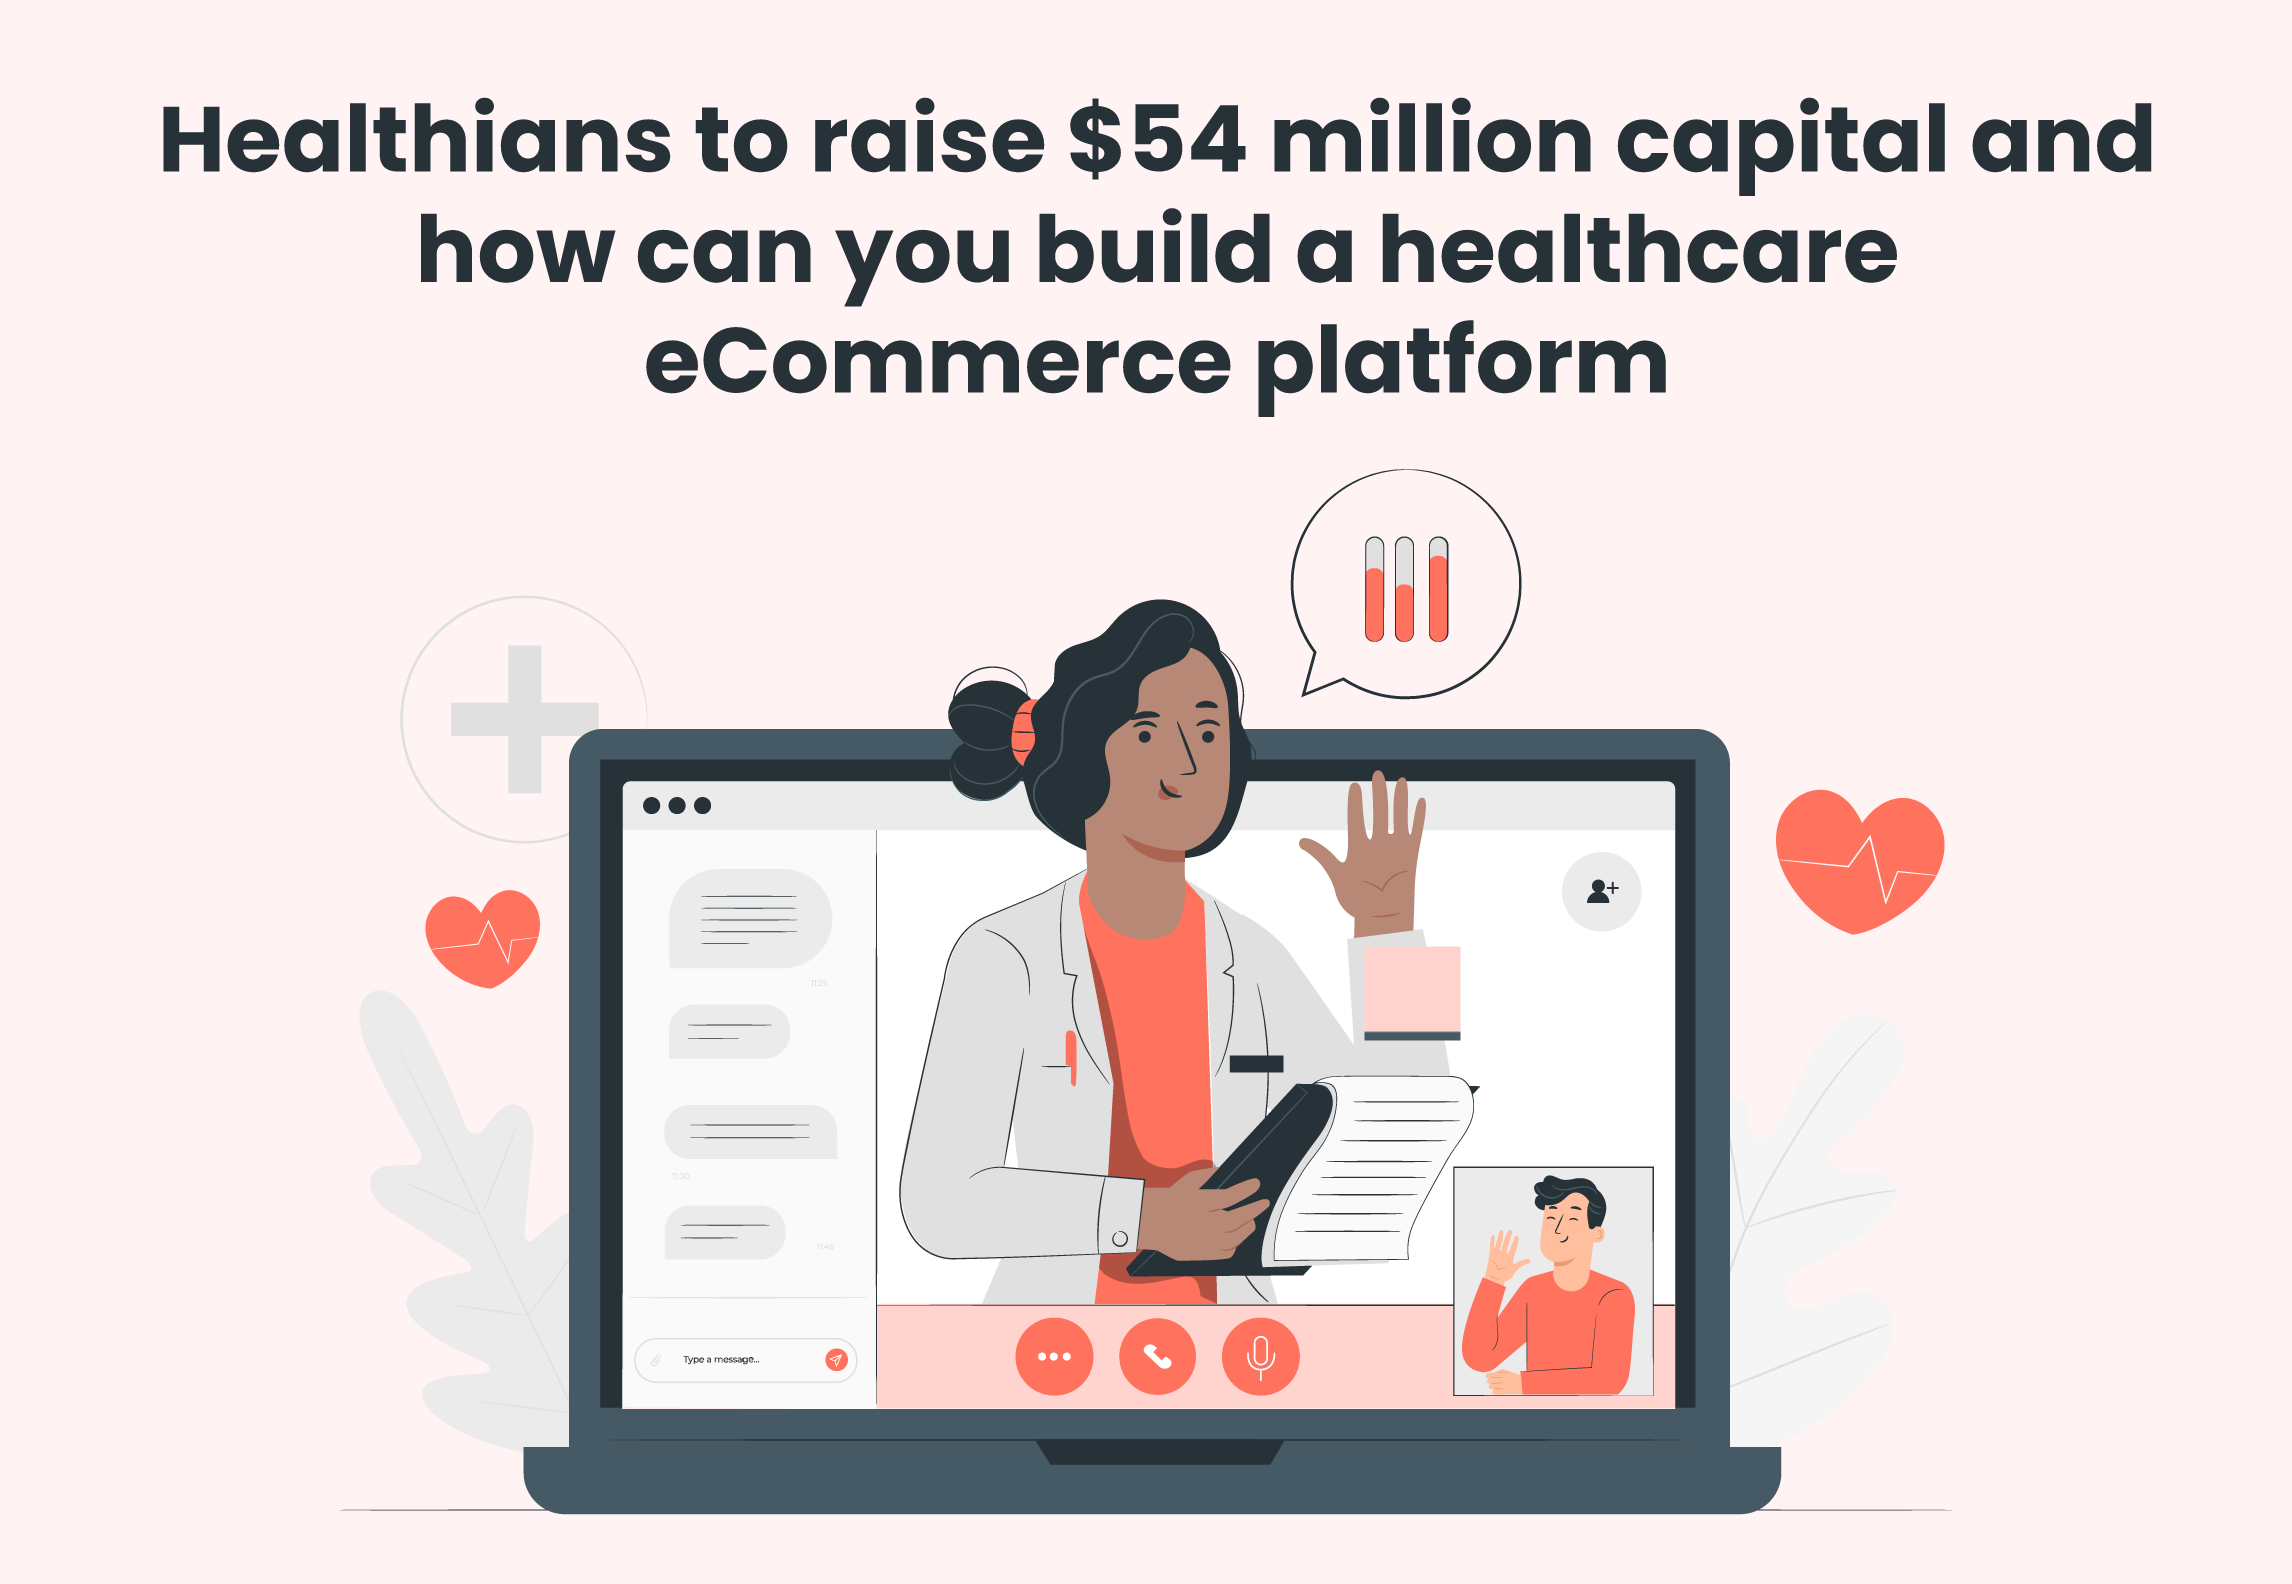 Healthians to raise $54 million capital and how can you build a healthcare eCommerce platform